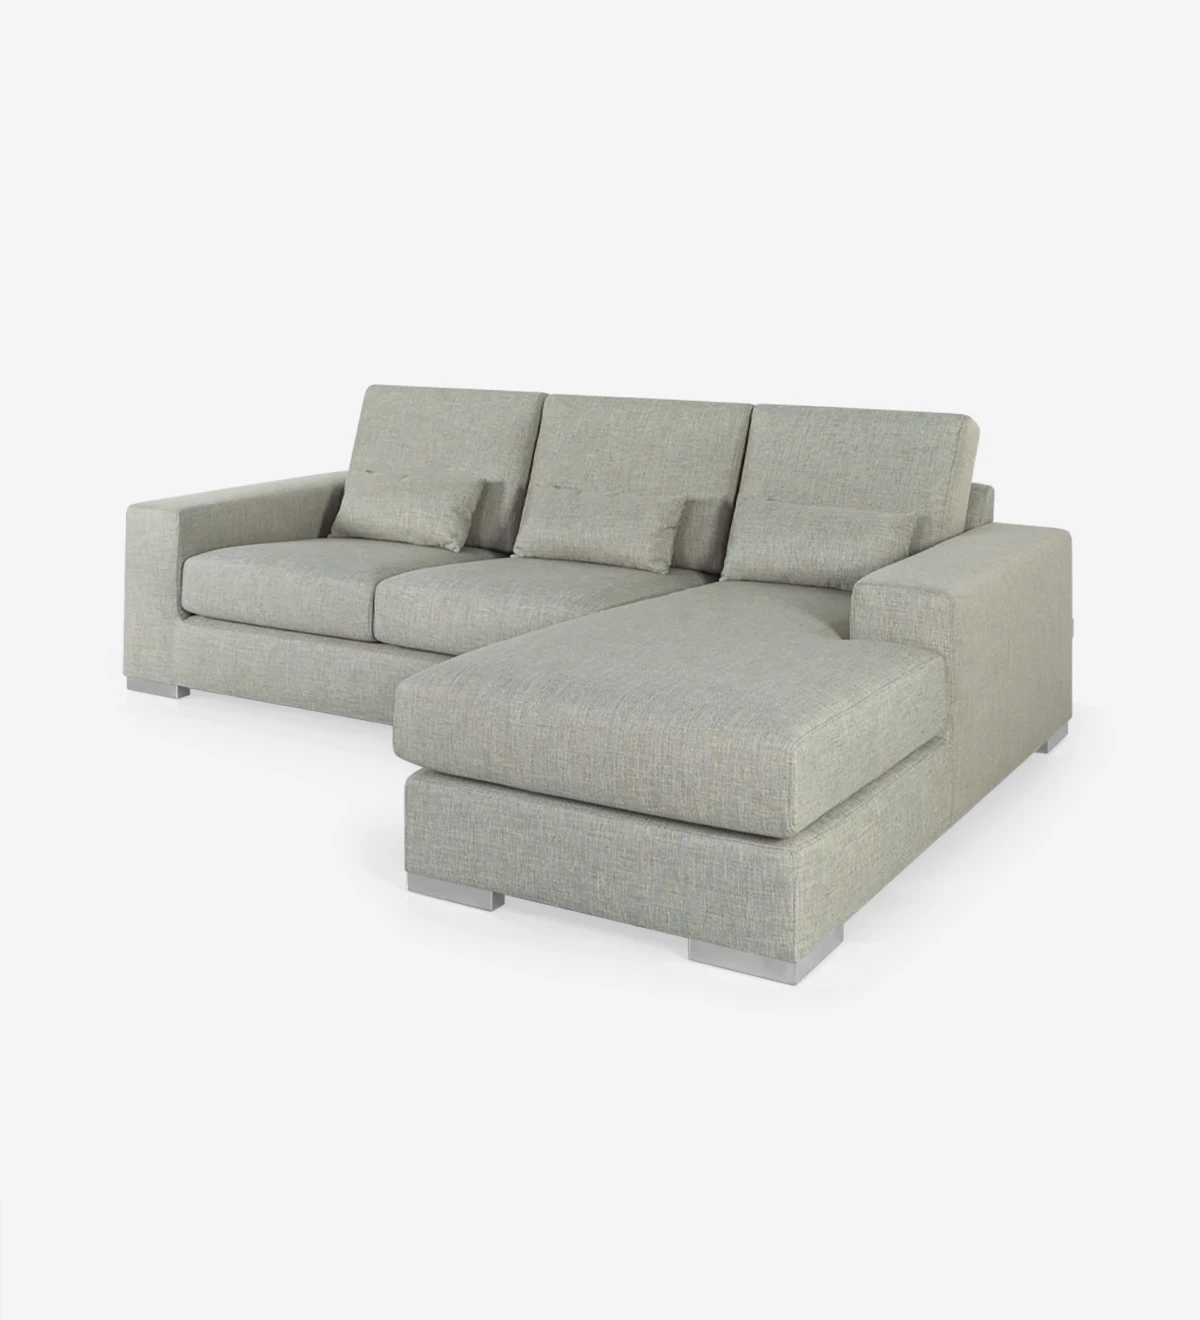 2 seater sofa with chaise longue, upholstered in fabric.